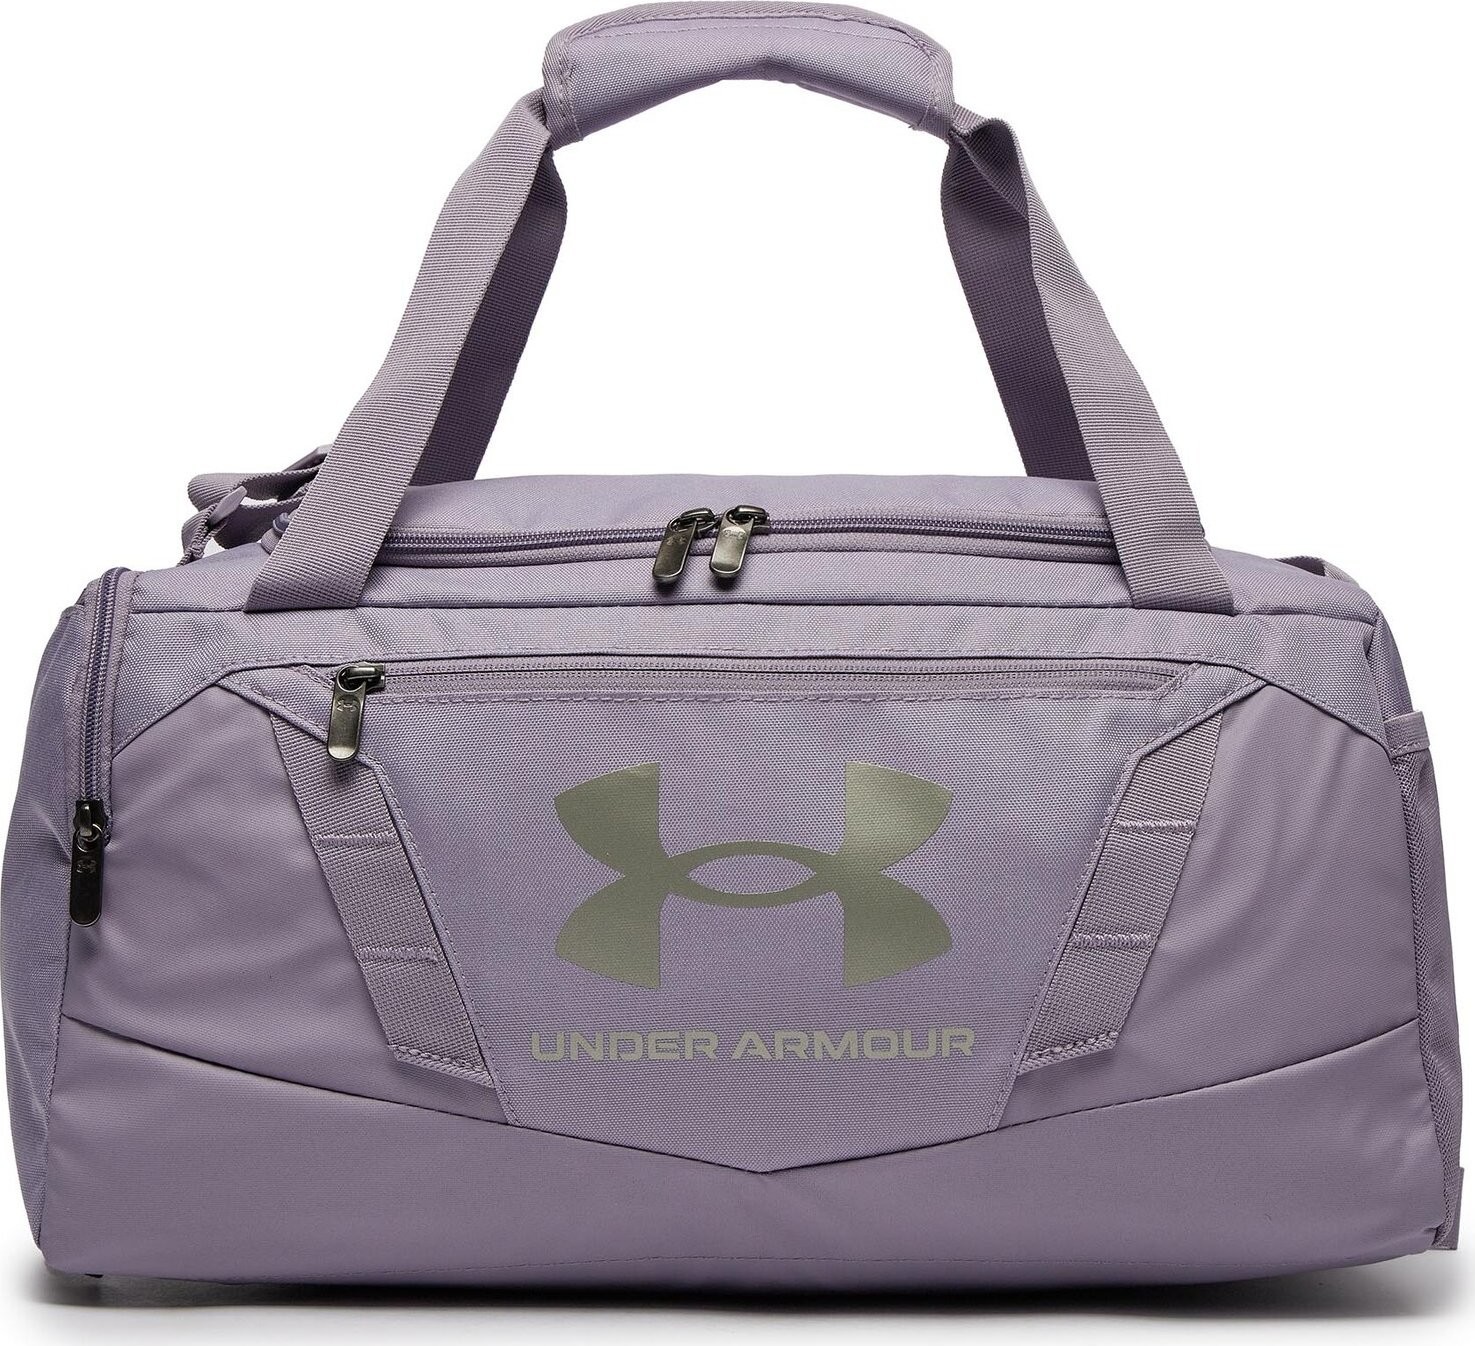 Taška Under Armour Ua Undeniable 5.0 Duffle Xs 1369221-550 Violet Gray/Violet Gray/Metallic Champagne Gold